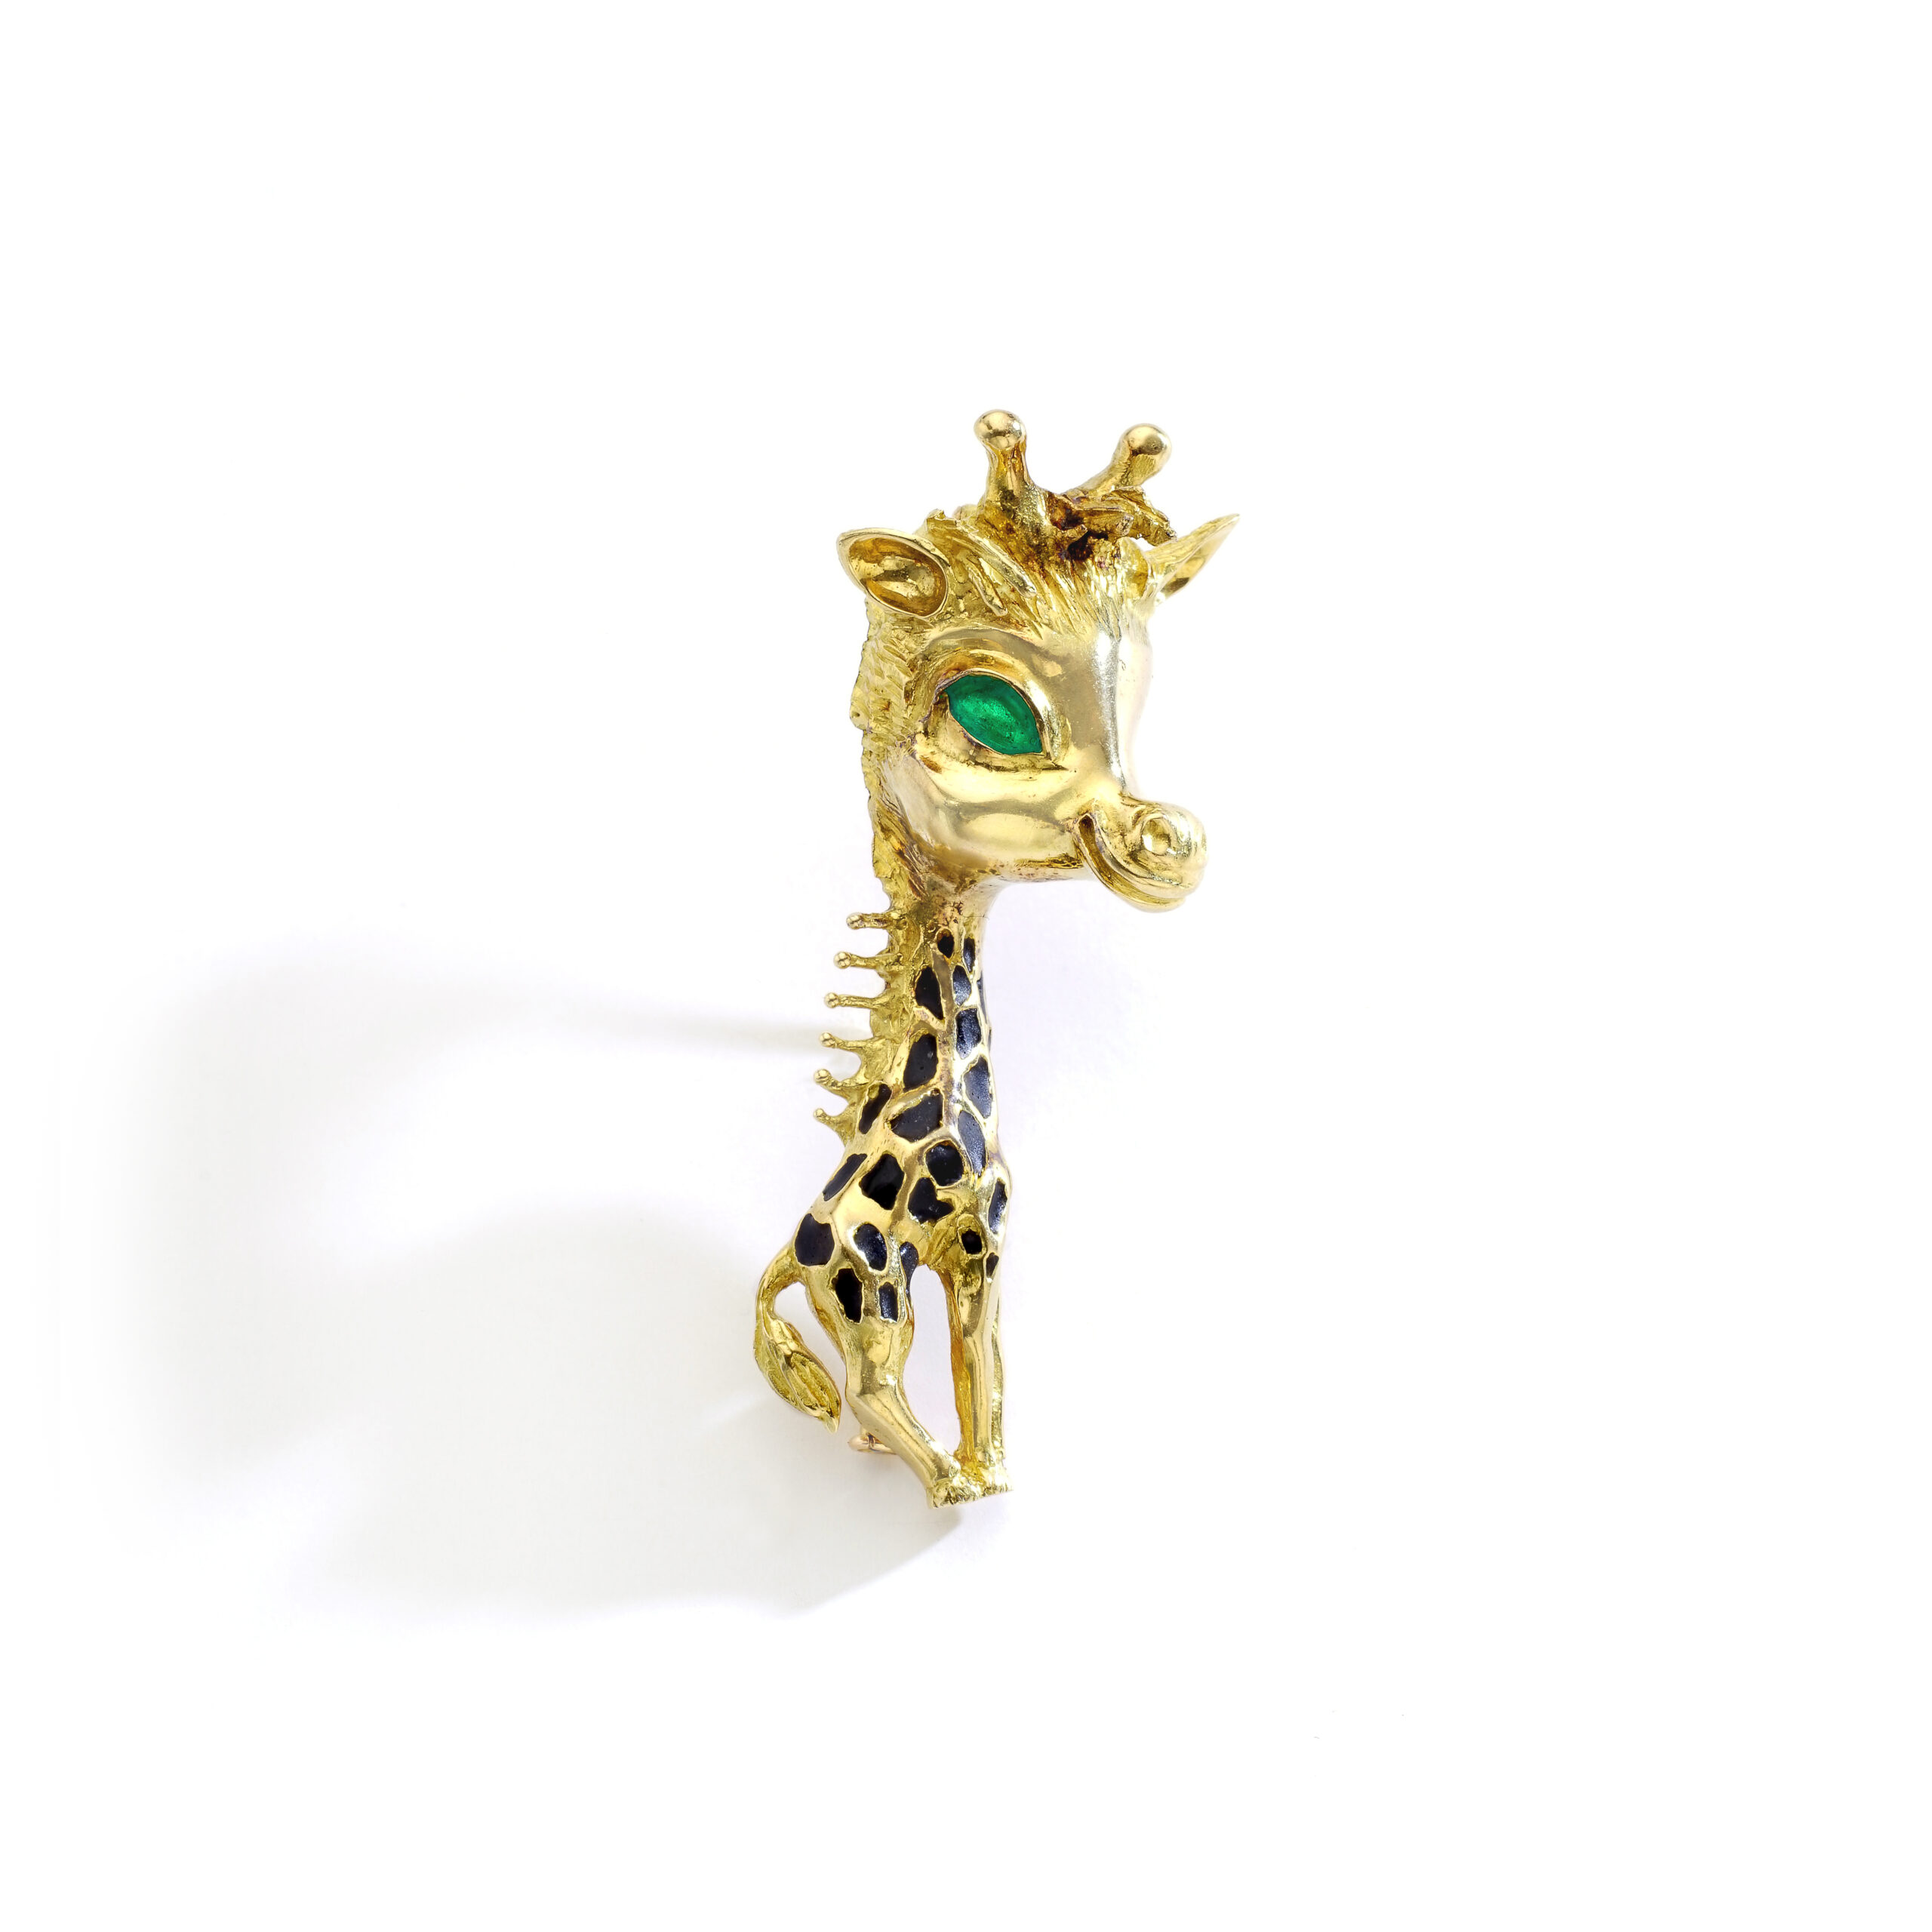 Front view of a French Gold Giraffe Brooch. Size: 6cm. The giraffe has one large green eye and 22 black giraffe spots.